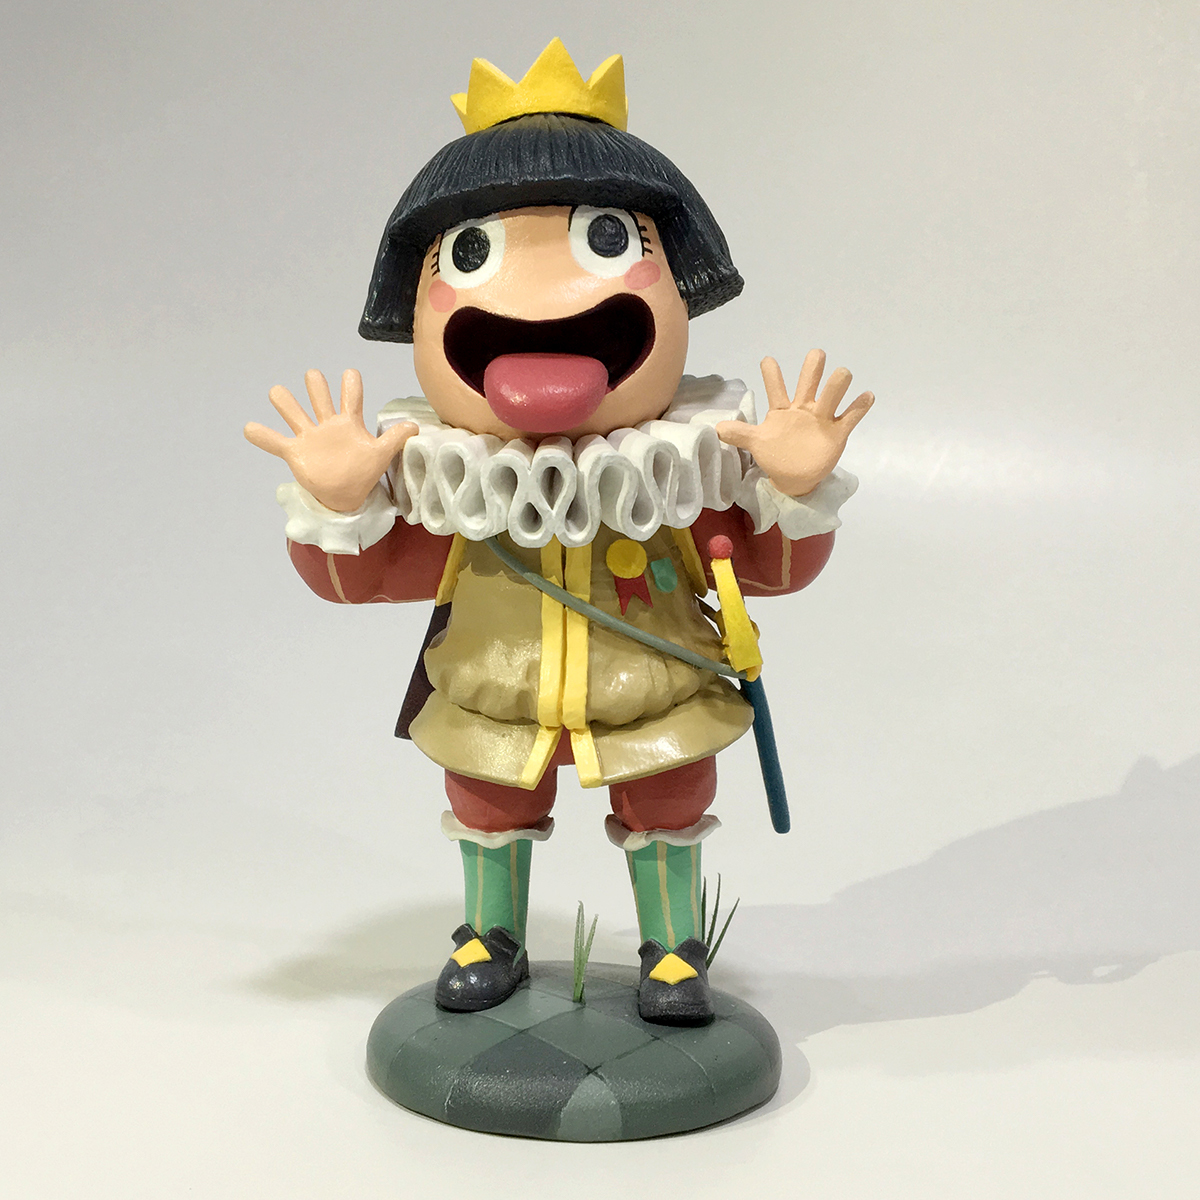 count conde king Little King ERR Erred mistaken mad king toys juguetes clay model clay sculpey